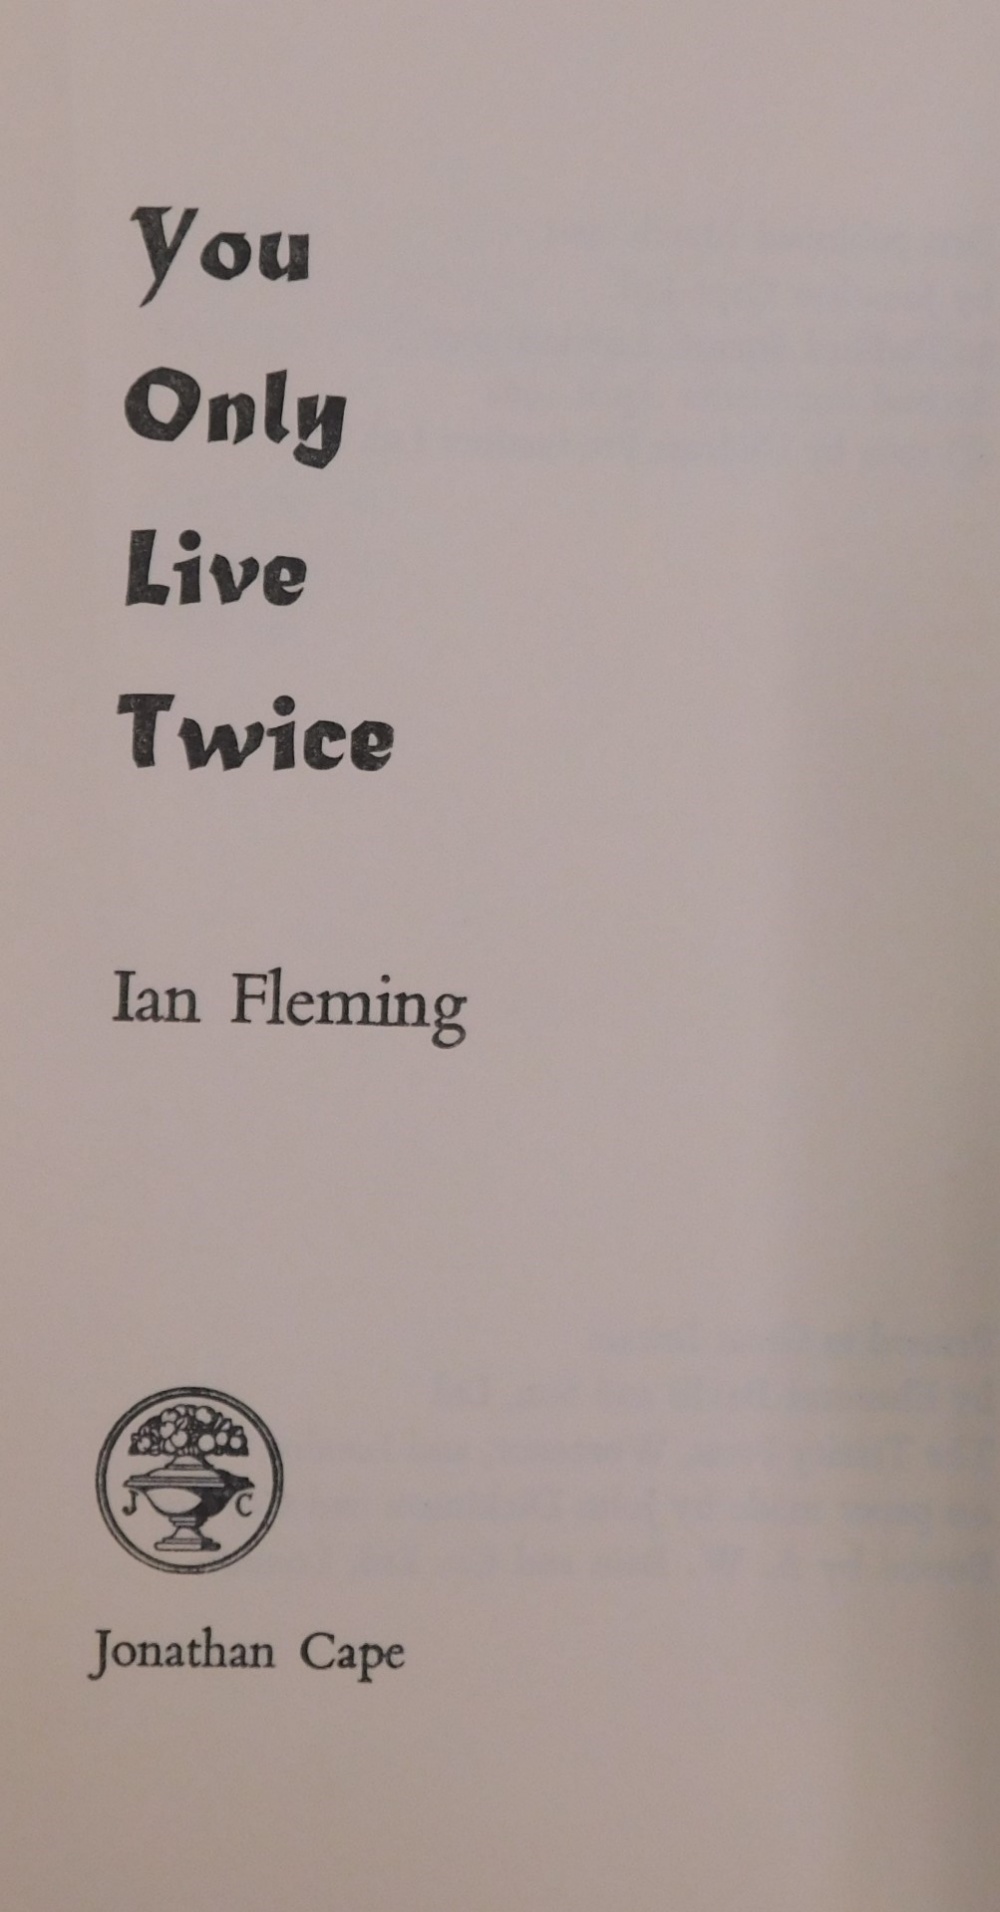 Fleming (Ian). You Only Live Twice, published by Jonathan Cape Ltd, second impression 1964, rare lat - Image 3 of 5